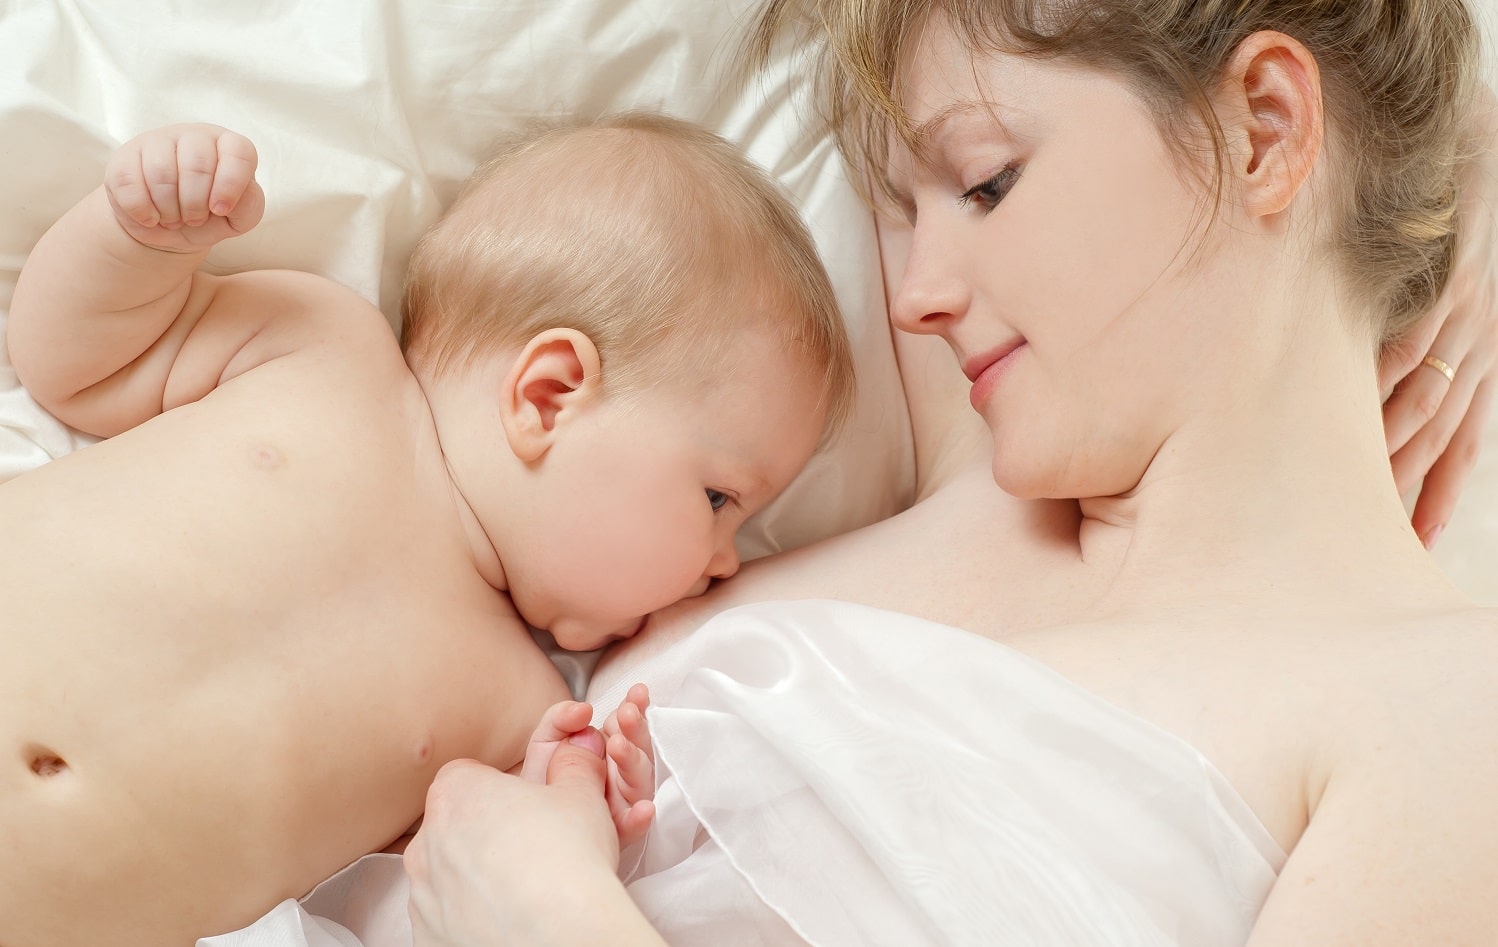 advantages of breastfeeding for your baby - 6 Tips for Breastfeeding While You’re Out With Your Baby